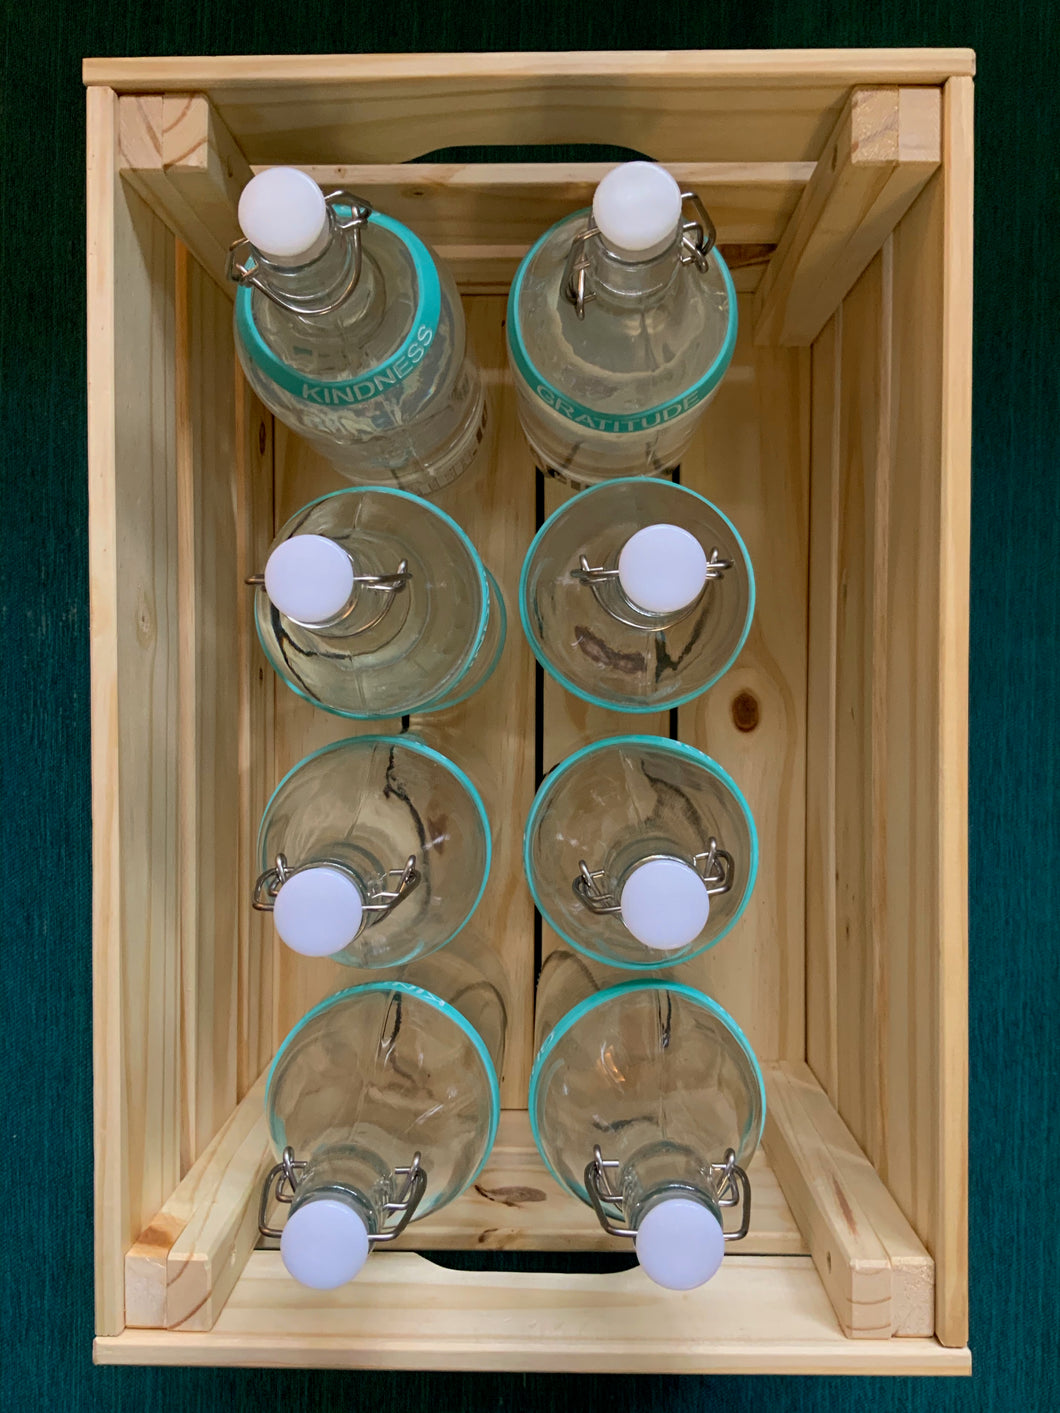 Refill with returned 8 x 32 oz. bottles and wooden crate = $50